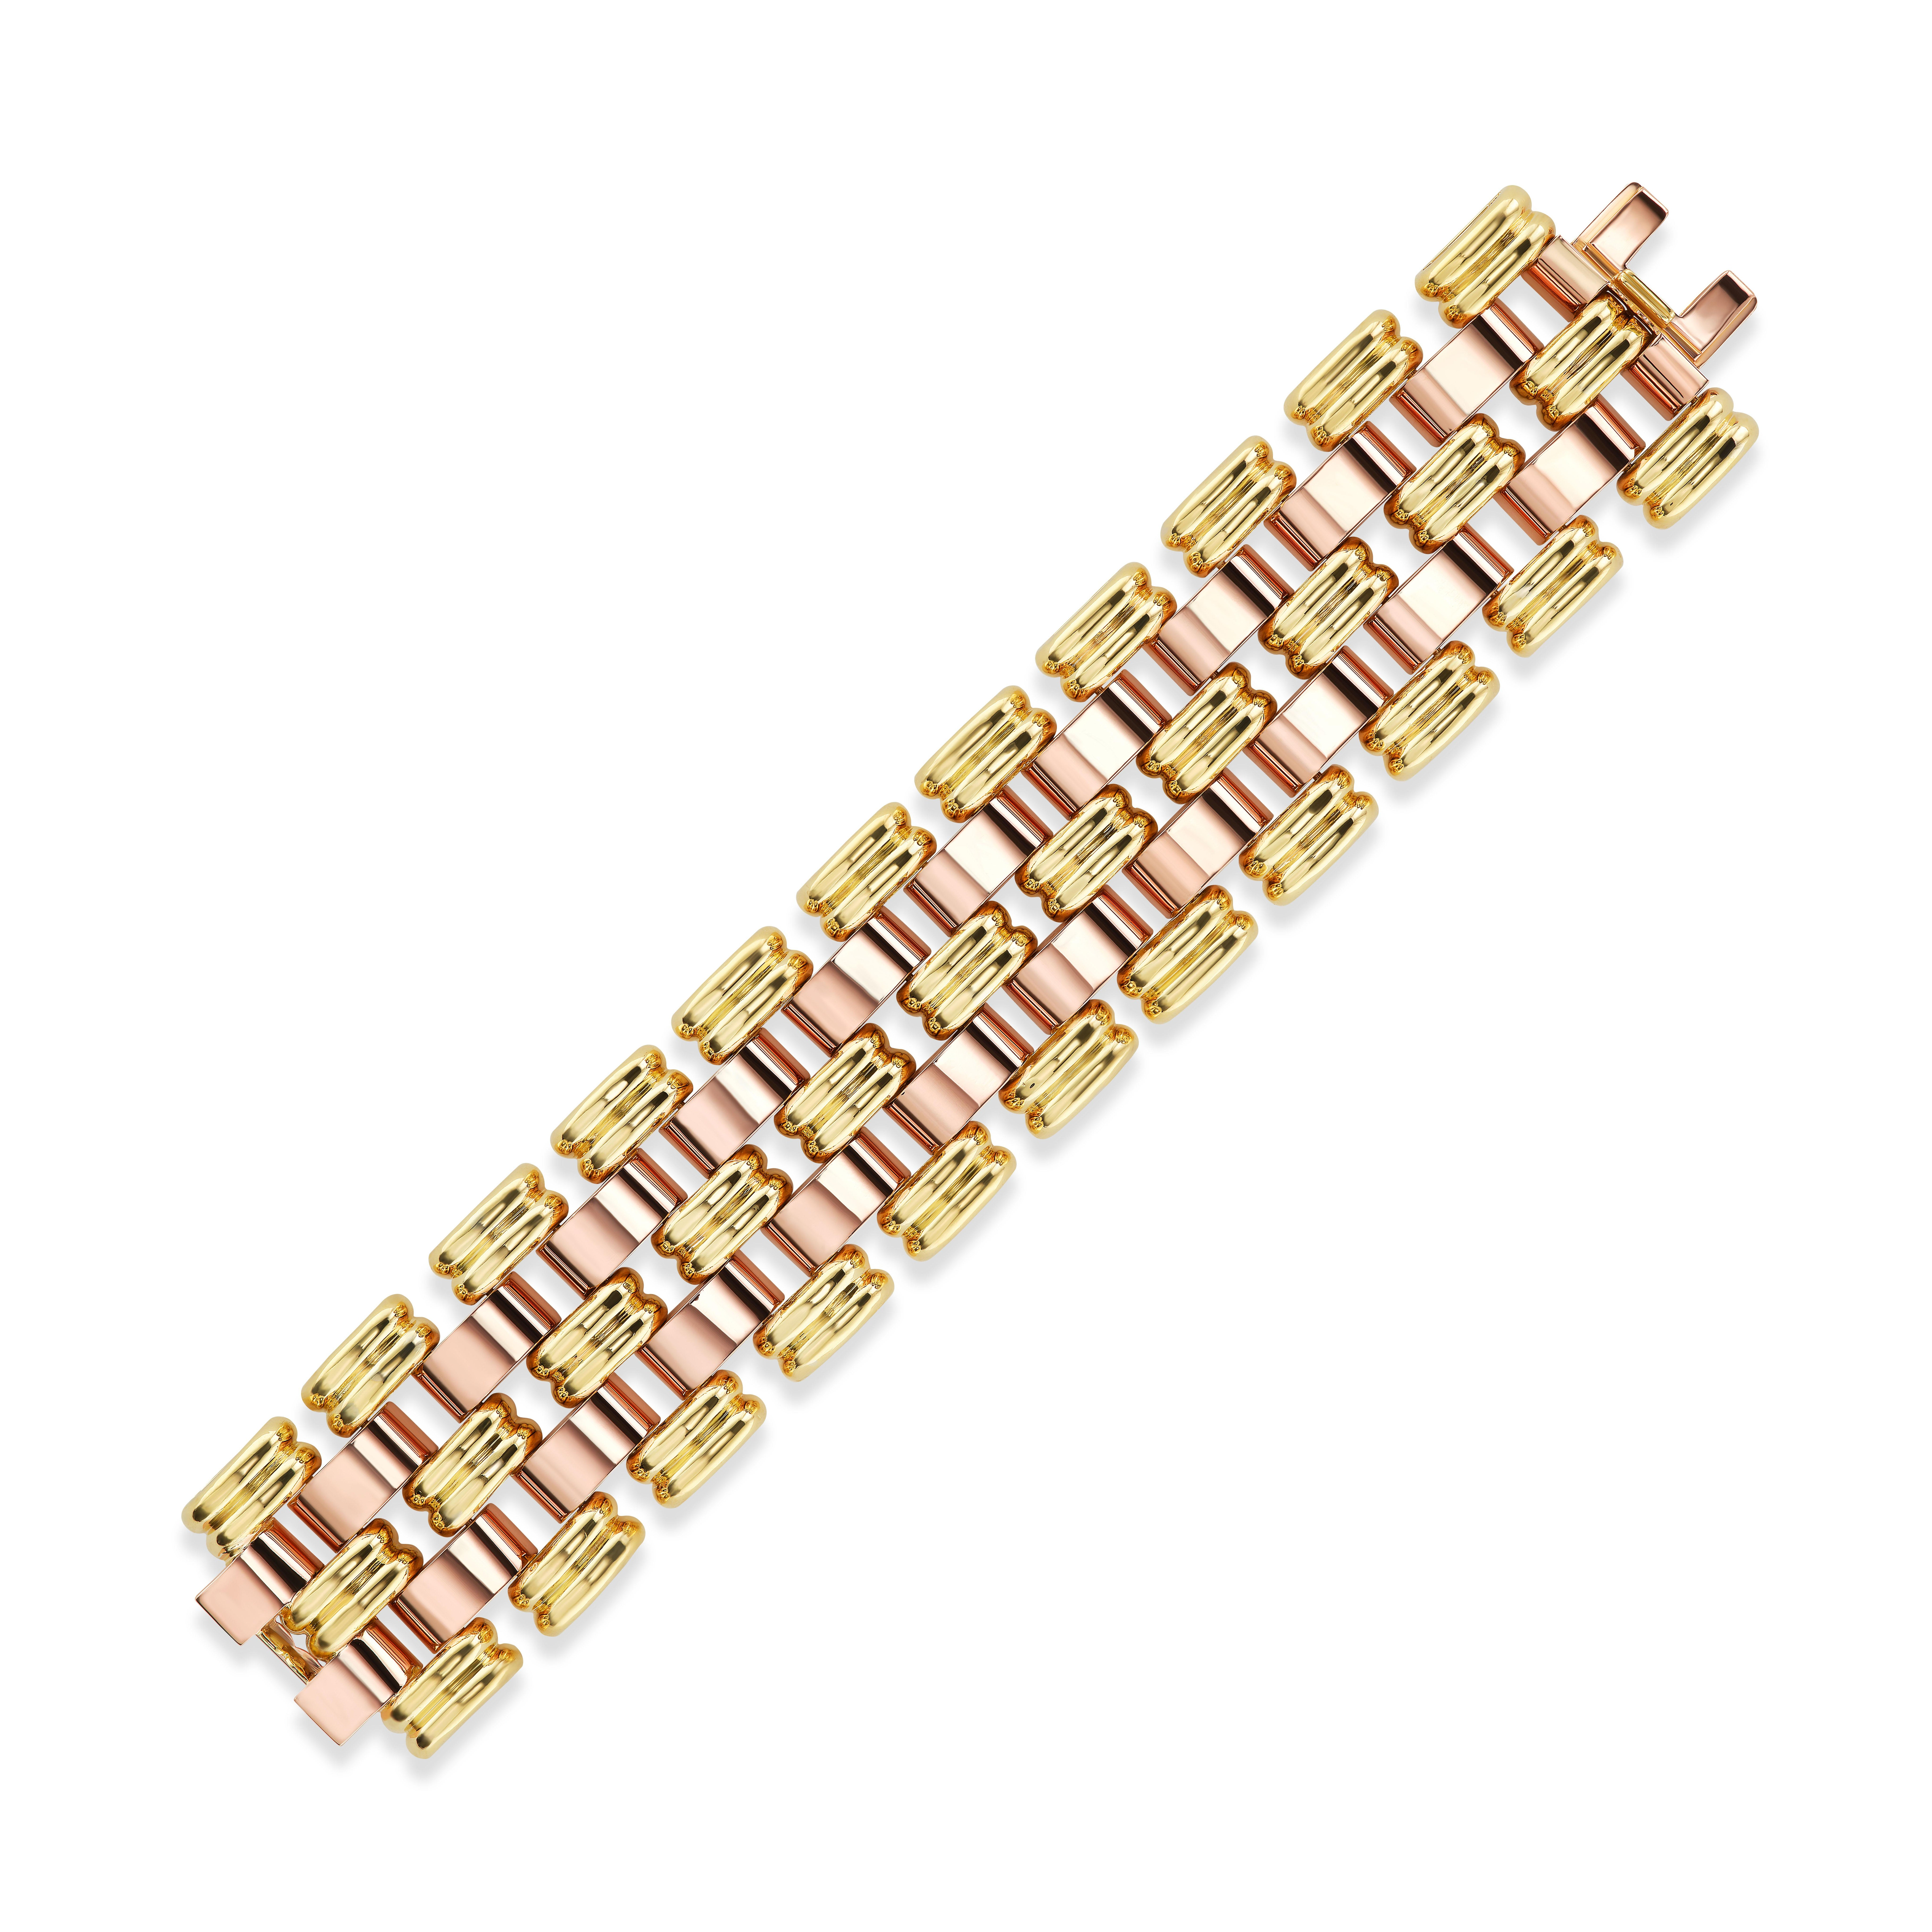 This highly polished retro 18K gold bracelet features yellow and rose gold links in a weave pattern. The substantial bracelet makes a striking statement in gold. 